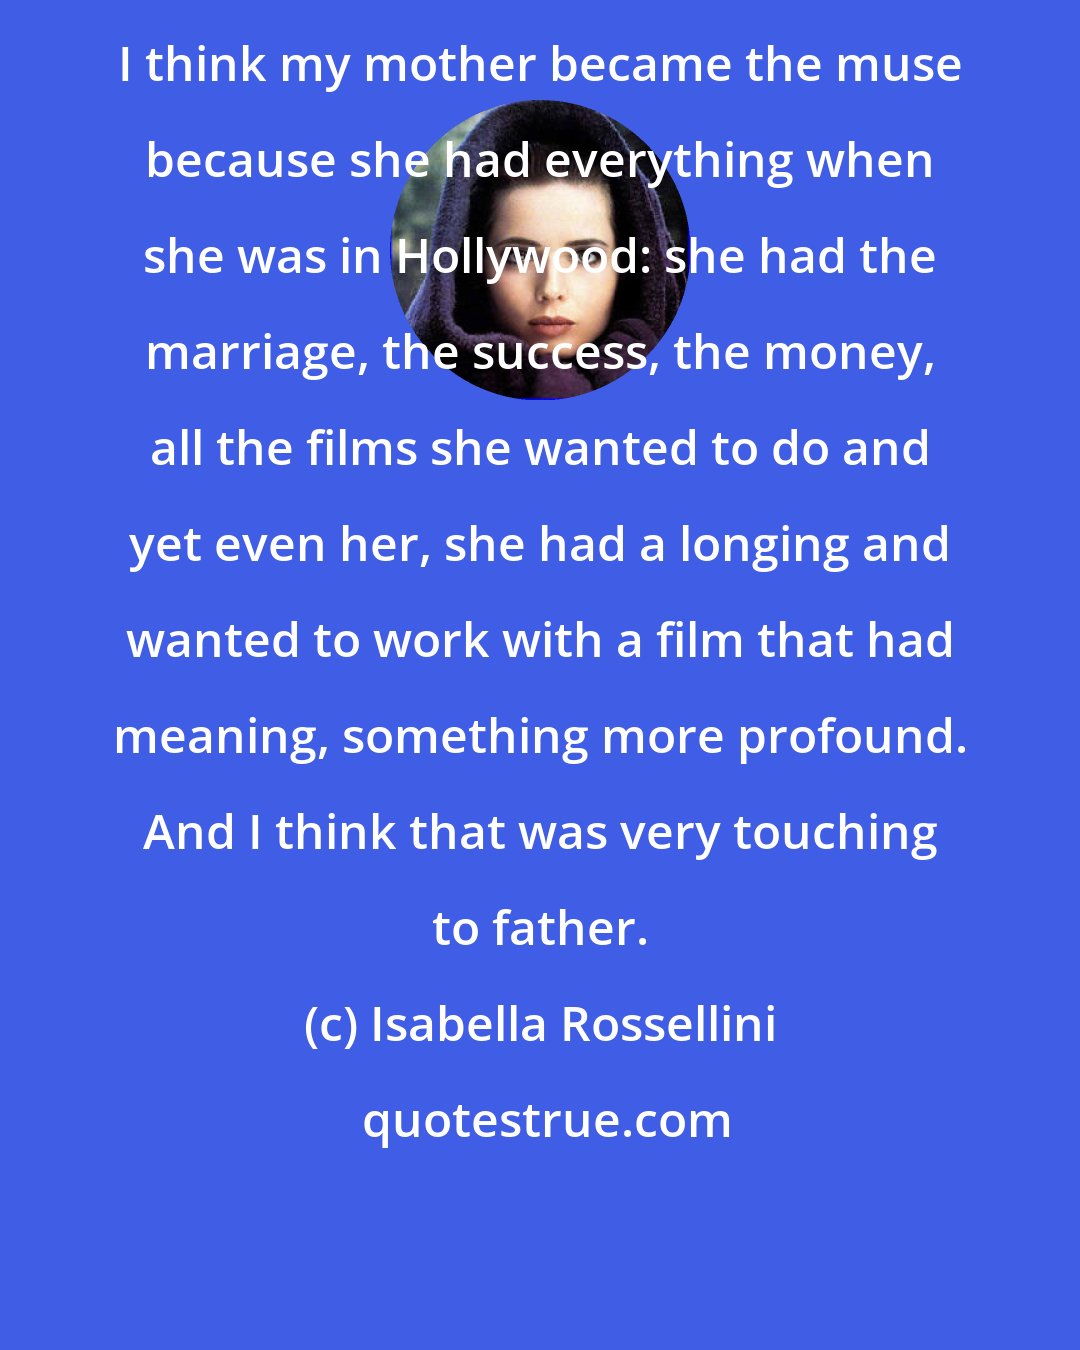 Isabella Rossellini: I think my mother became the muse because she had everything when she was in Hollywood: she had the marriage, the success, the money, all the films she wanted to do and yet even her, she had a longing and wanted to work with a film that had meaning, something more profound. And I think that was very touching to father.